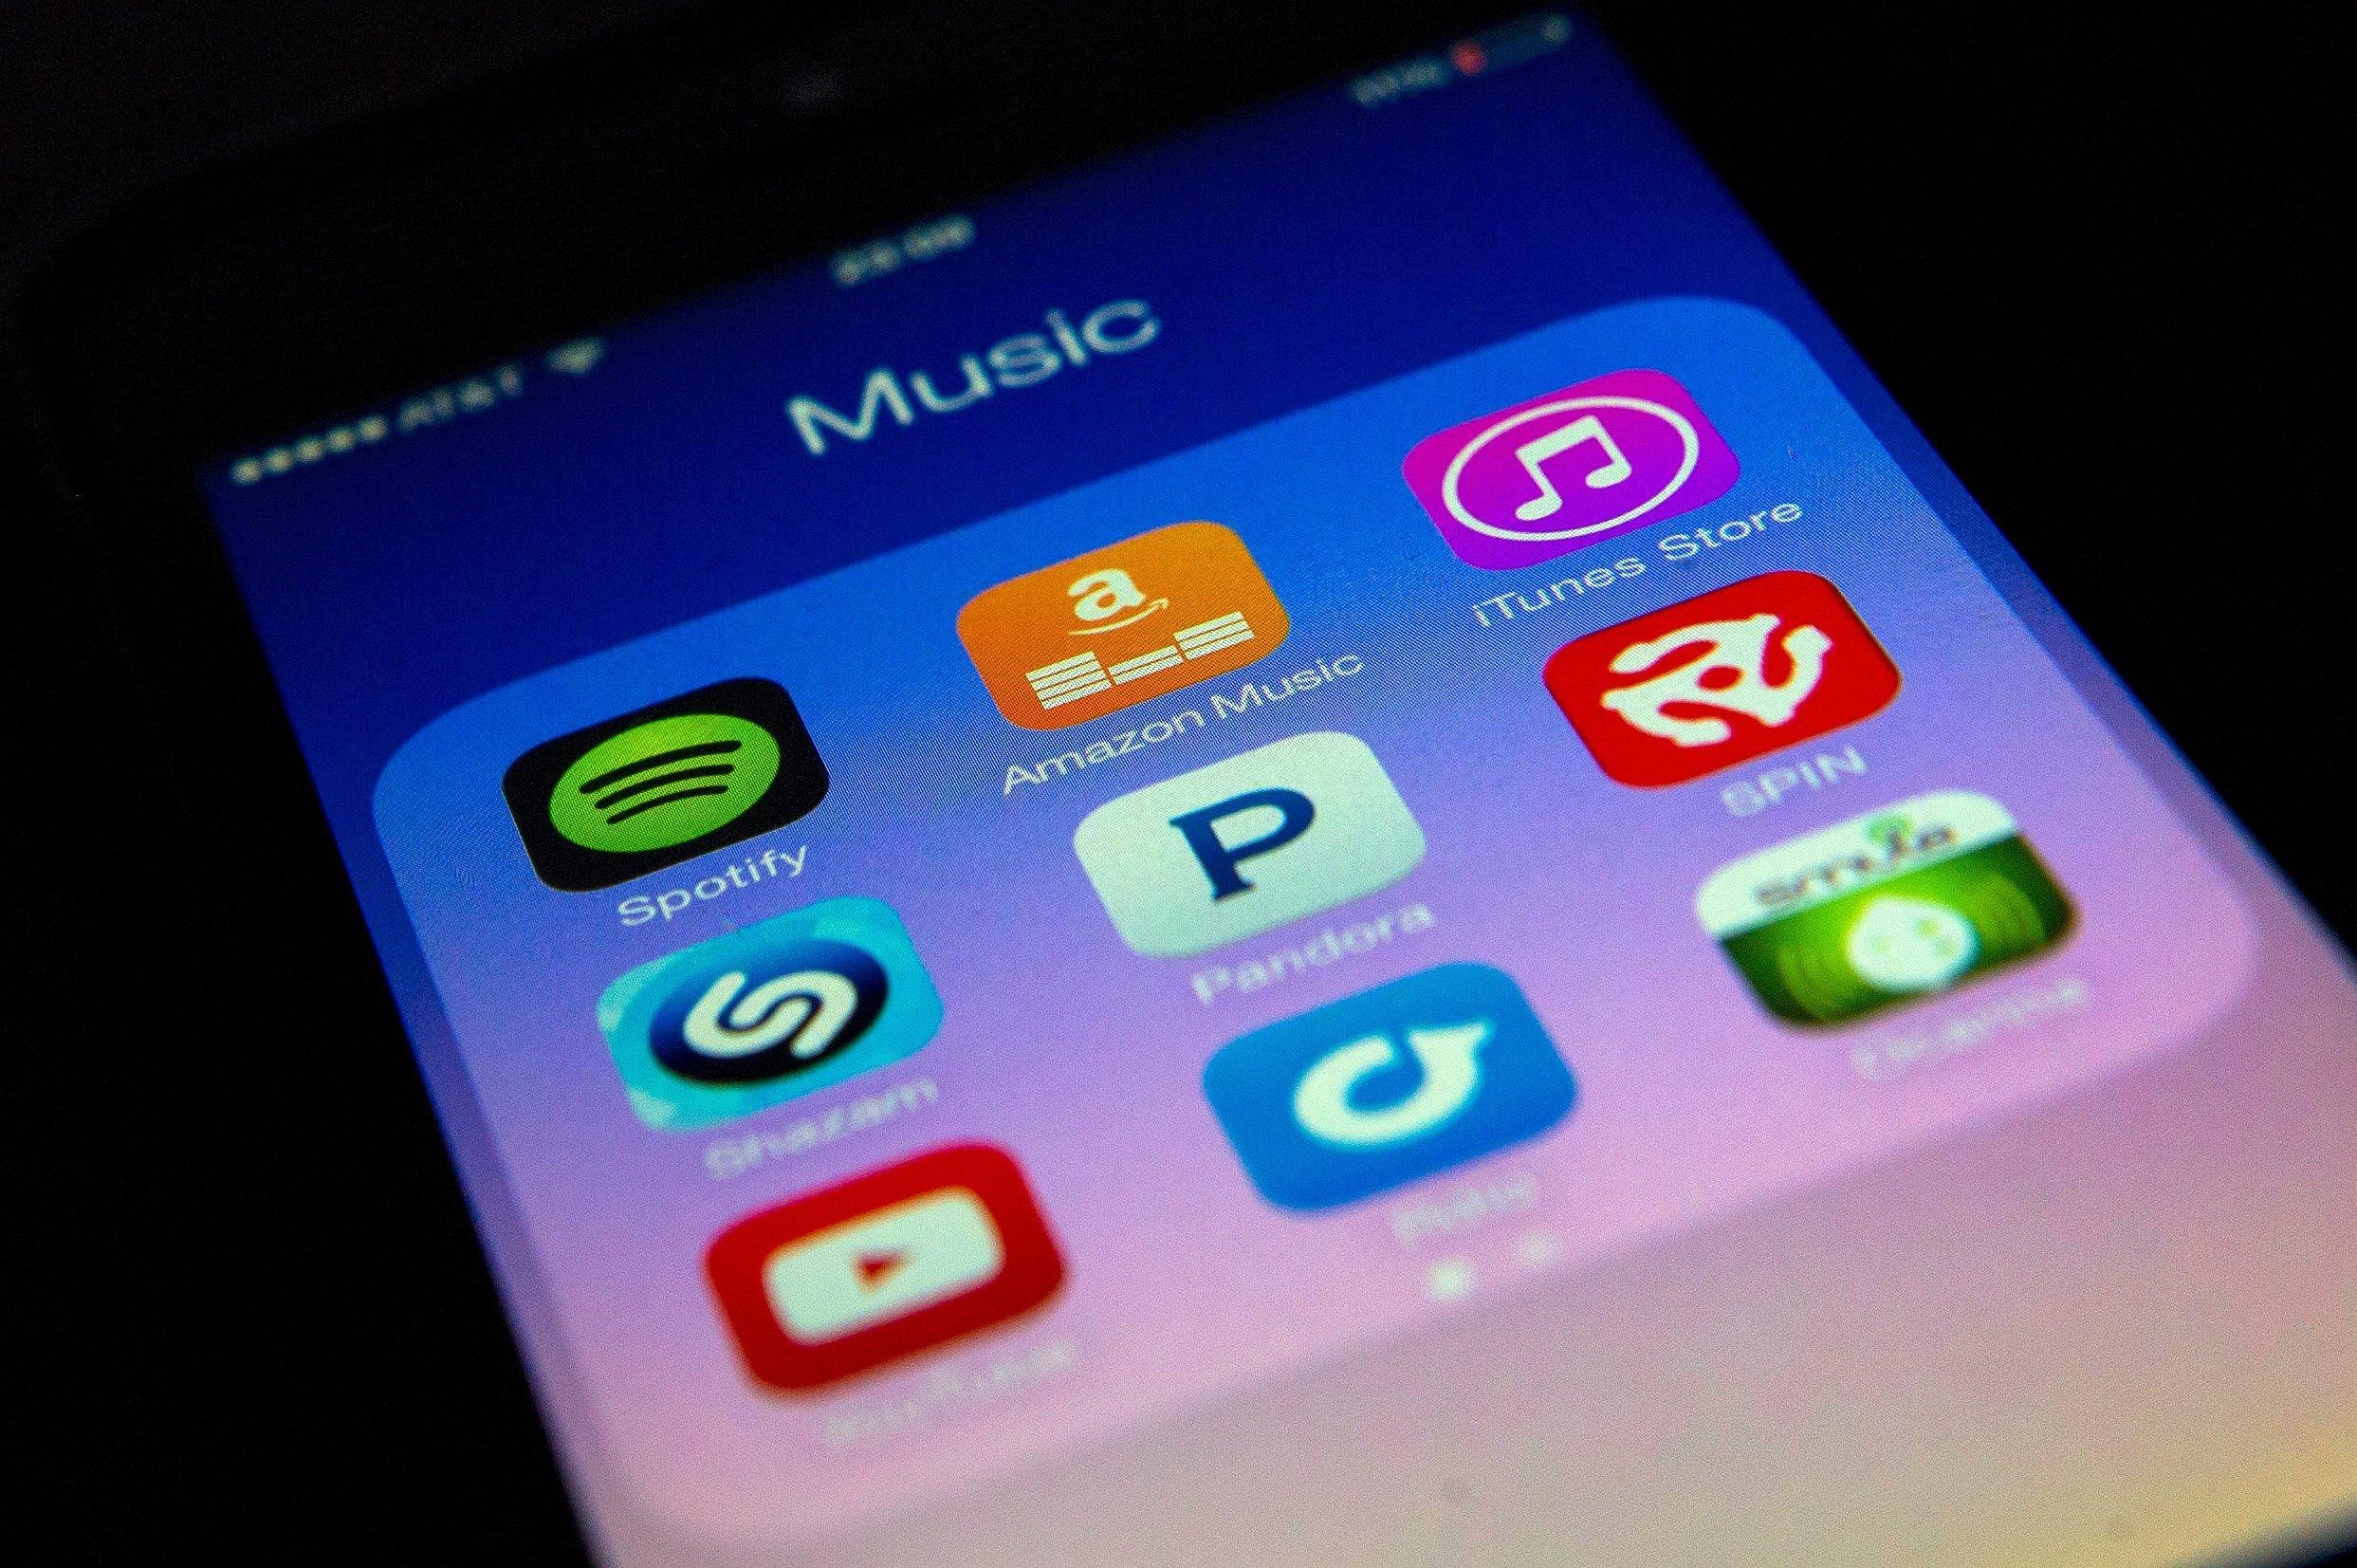 Mobile phone music apps